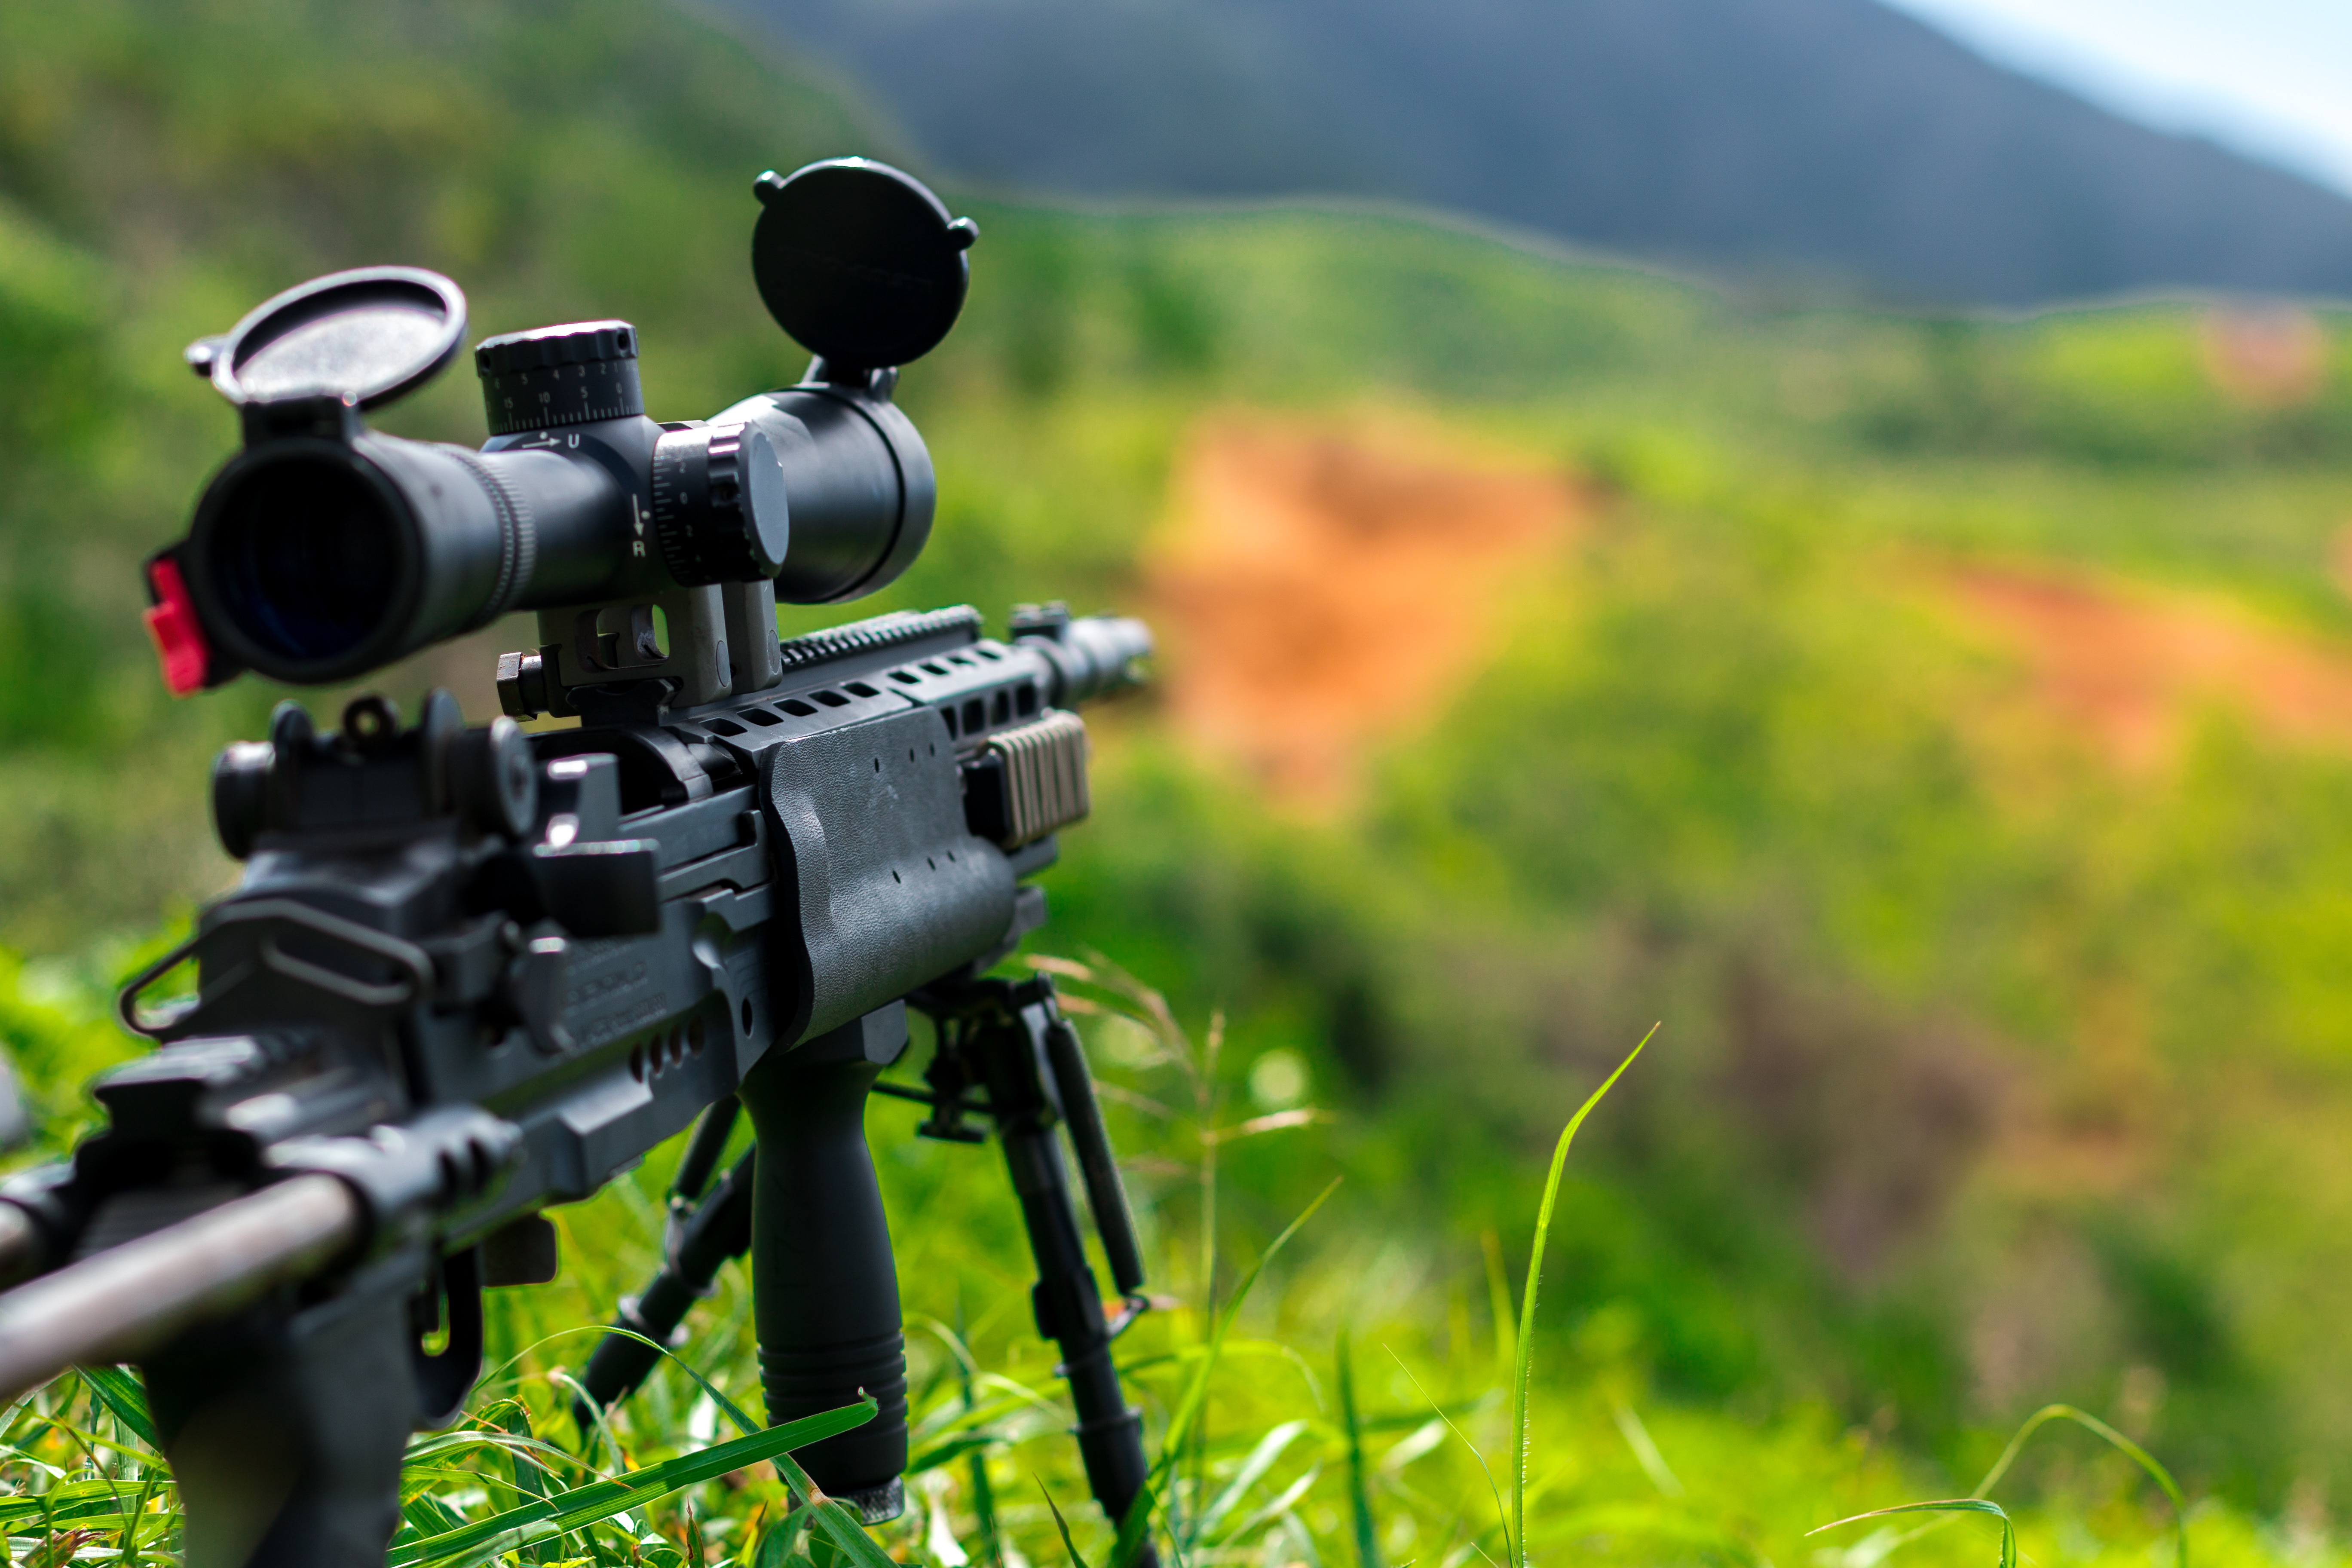 closed up photo of sniper riffle on grass